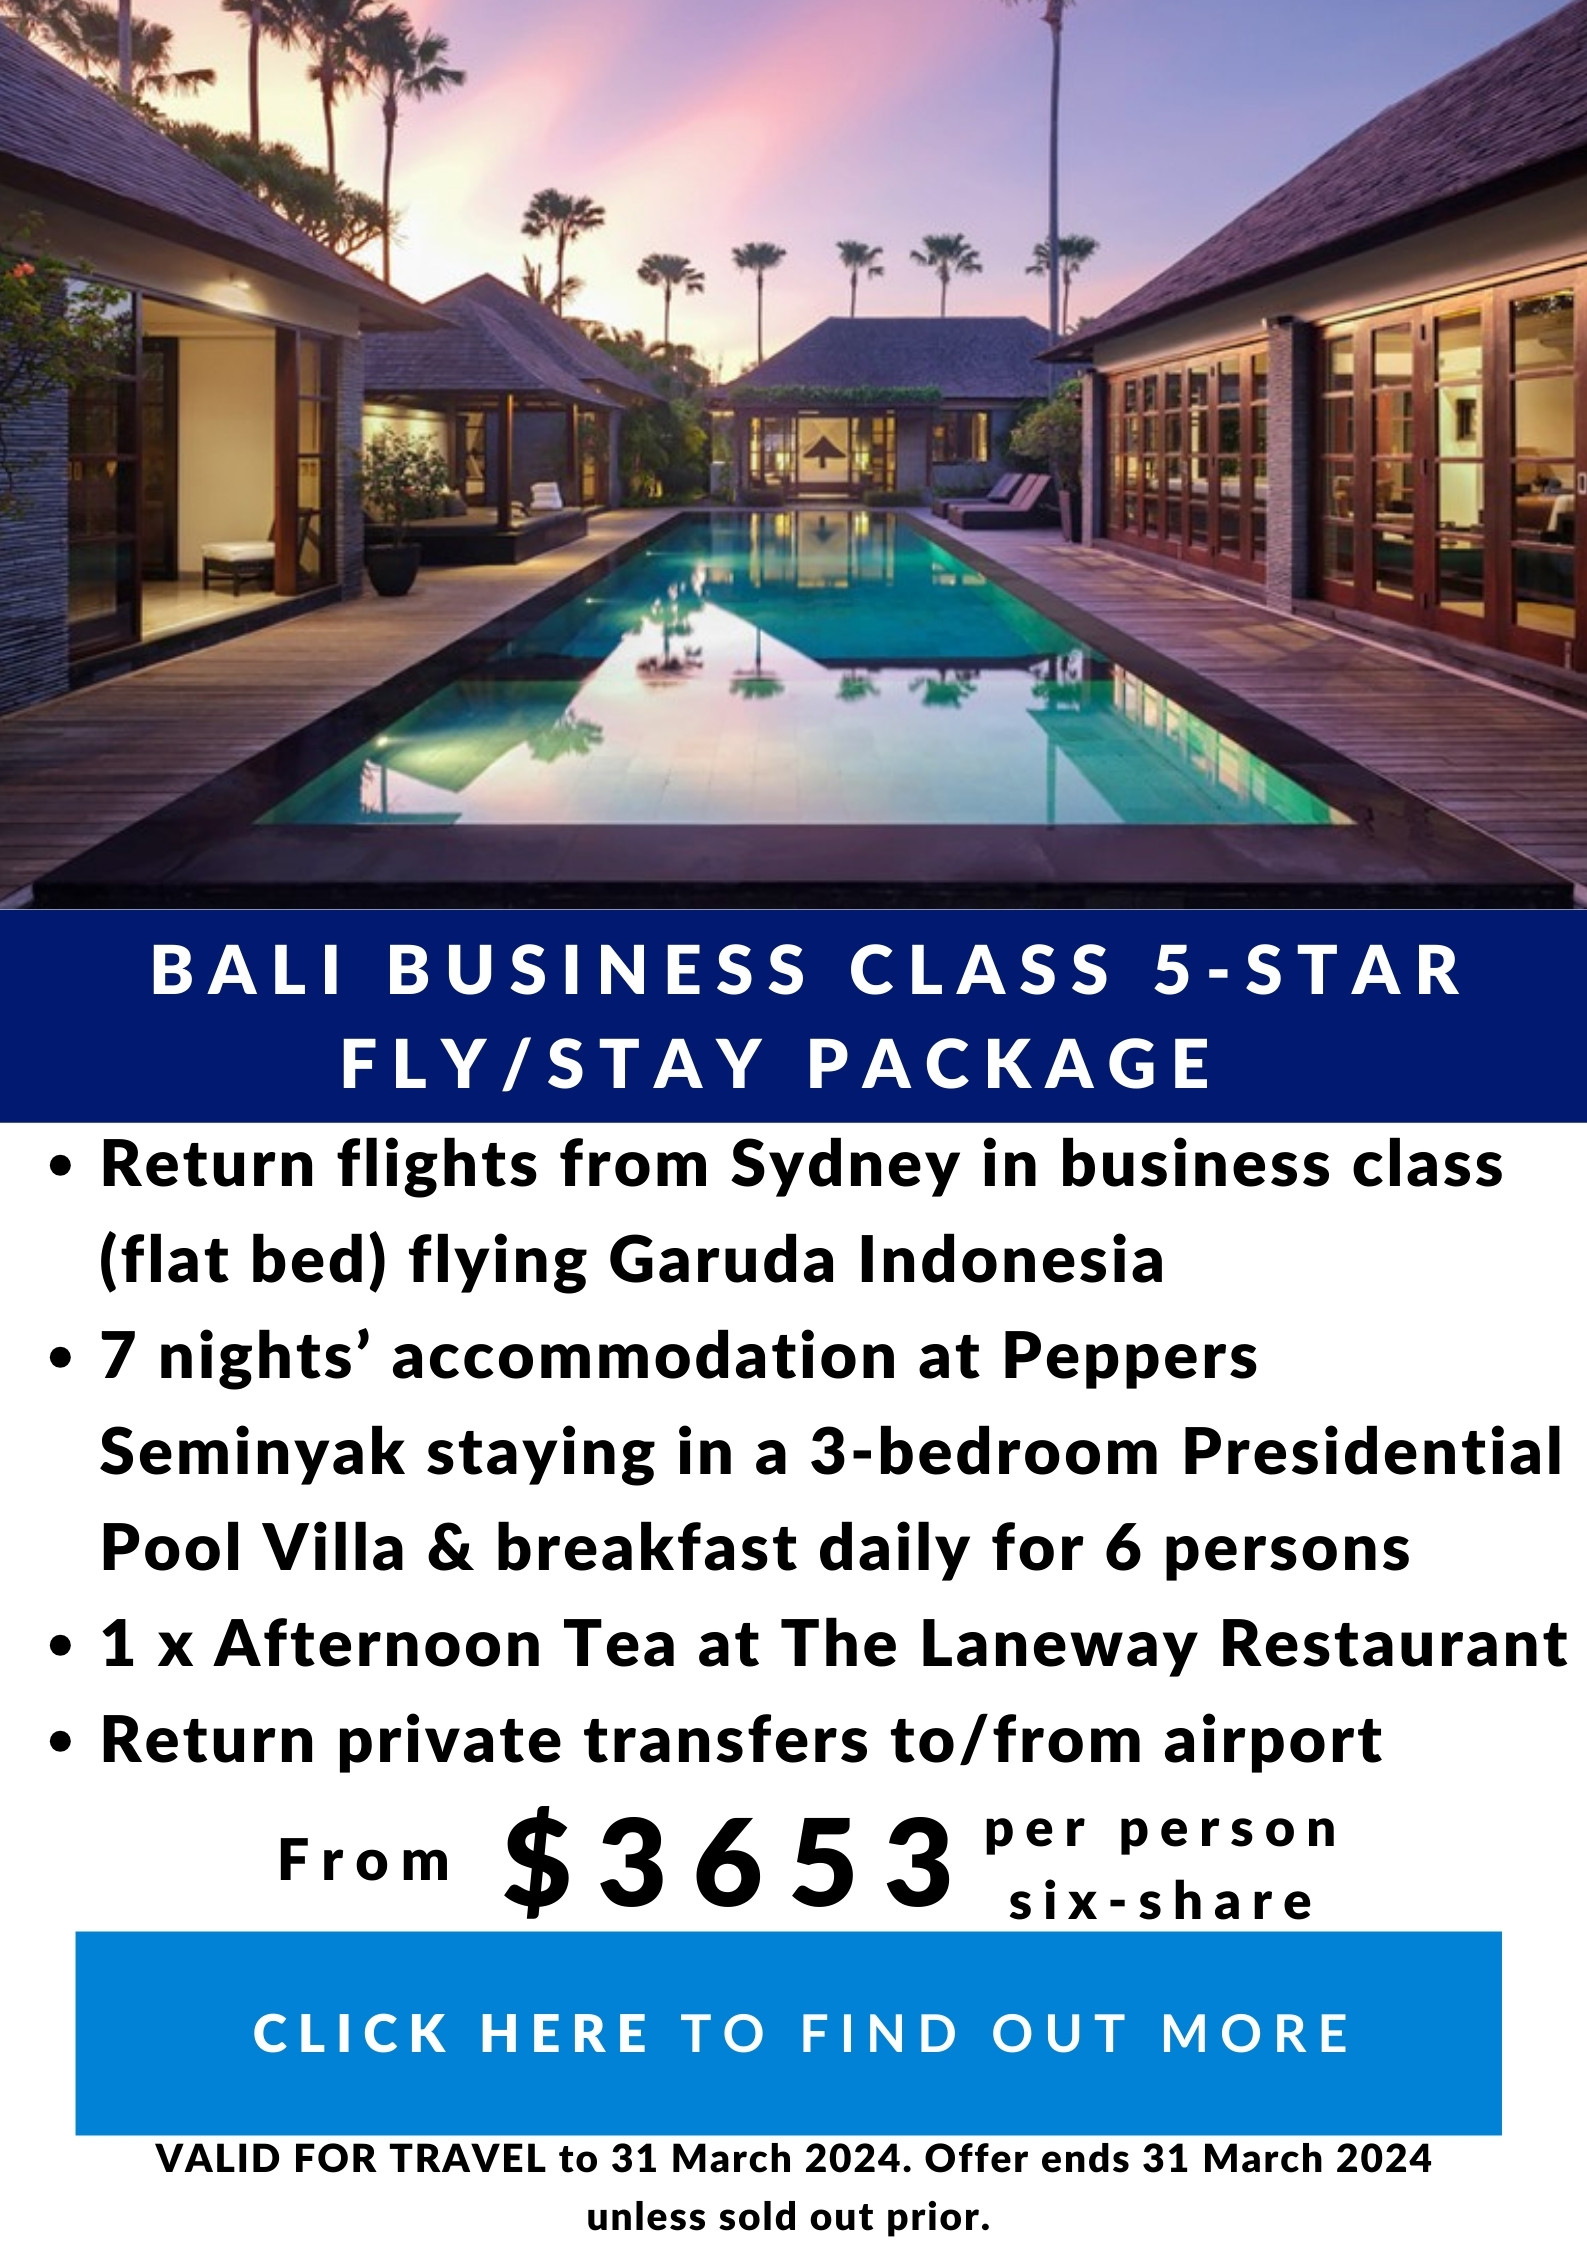 From $3653 per person six share